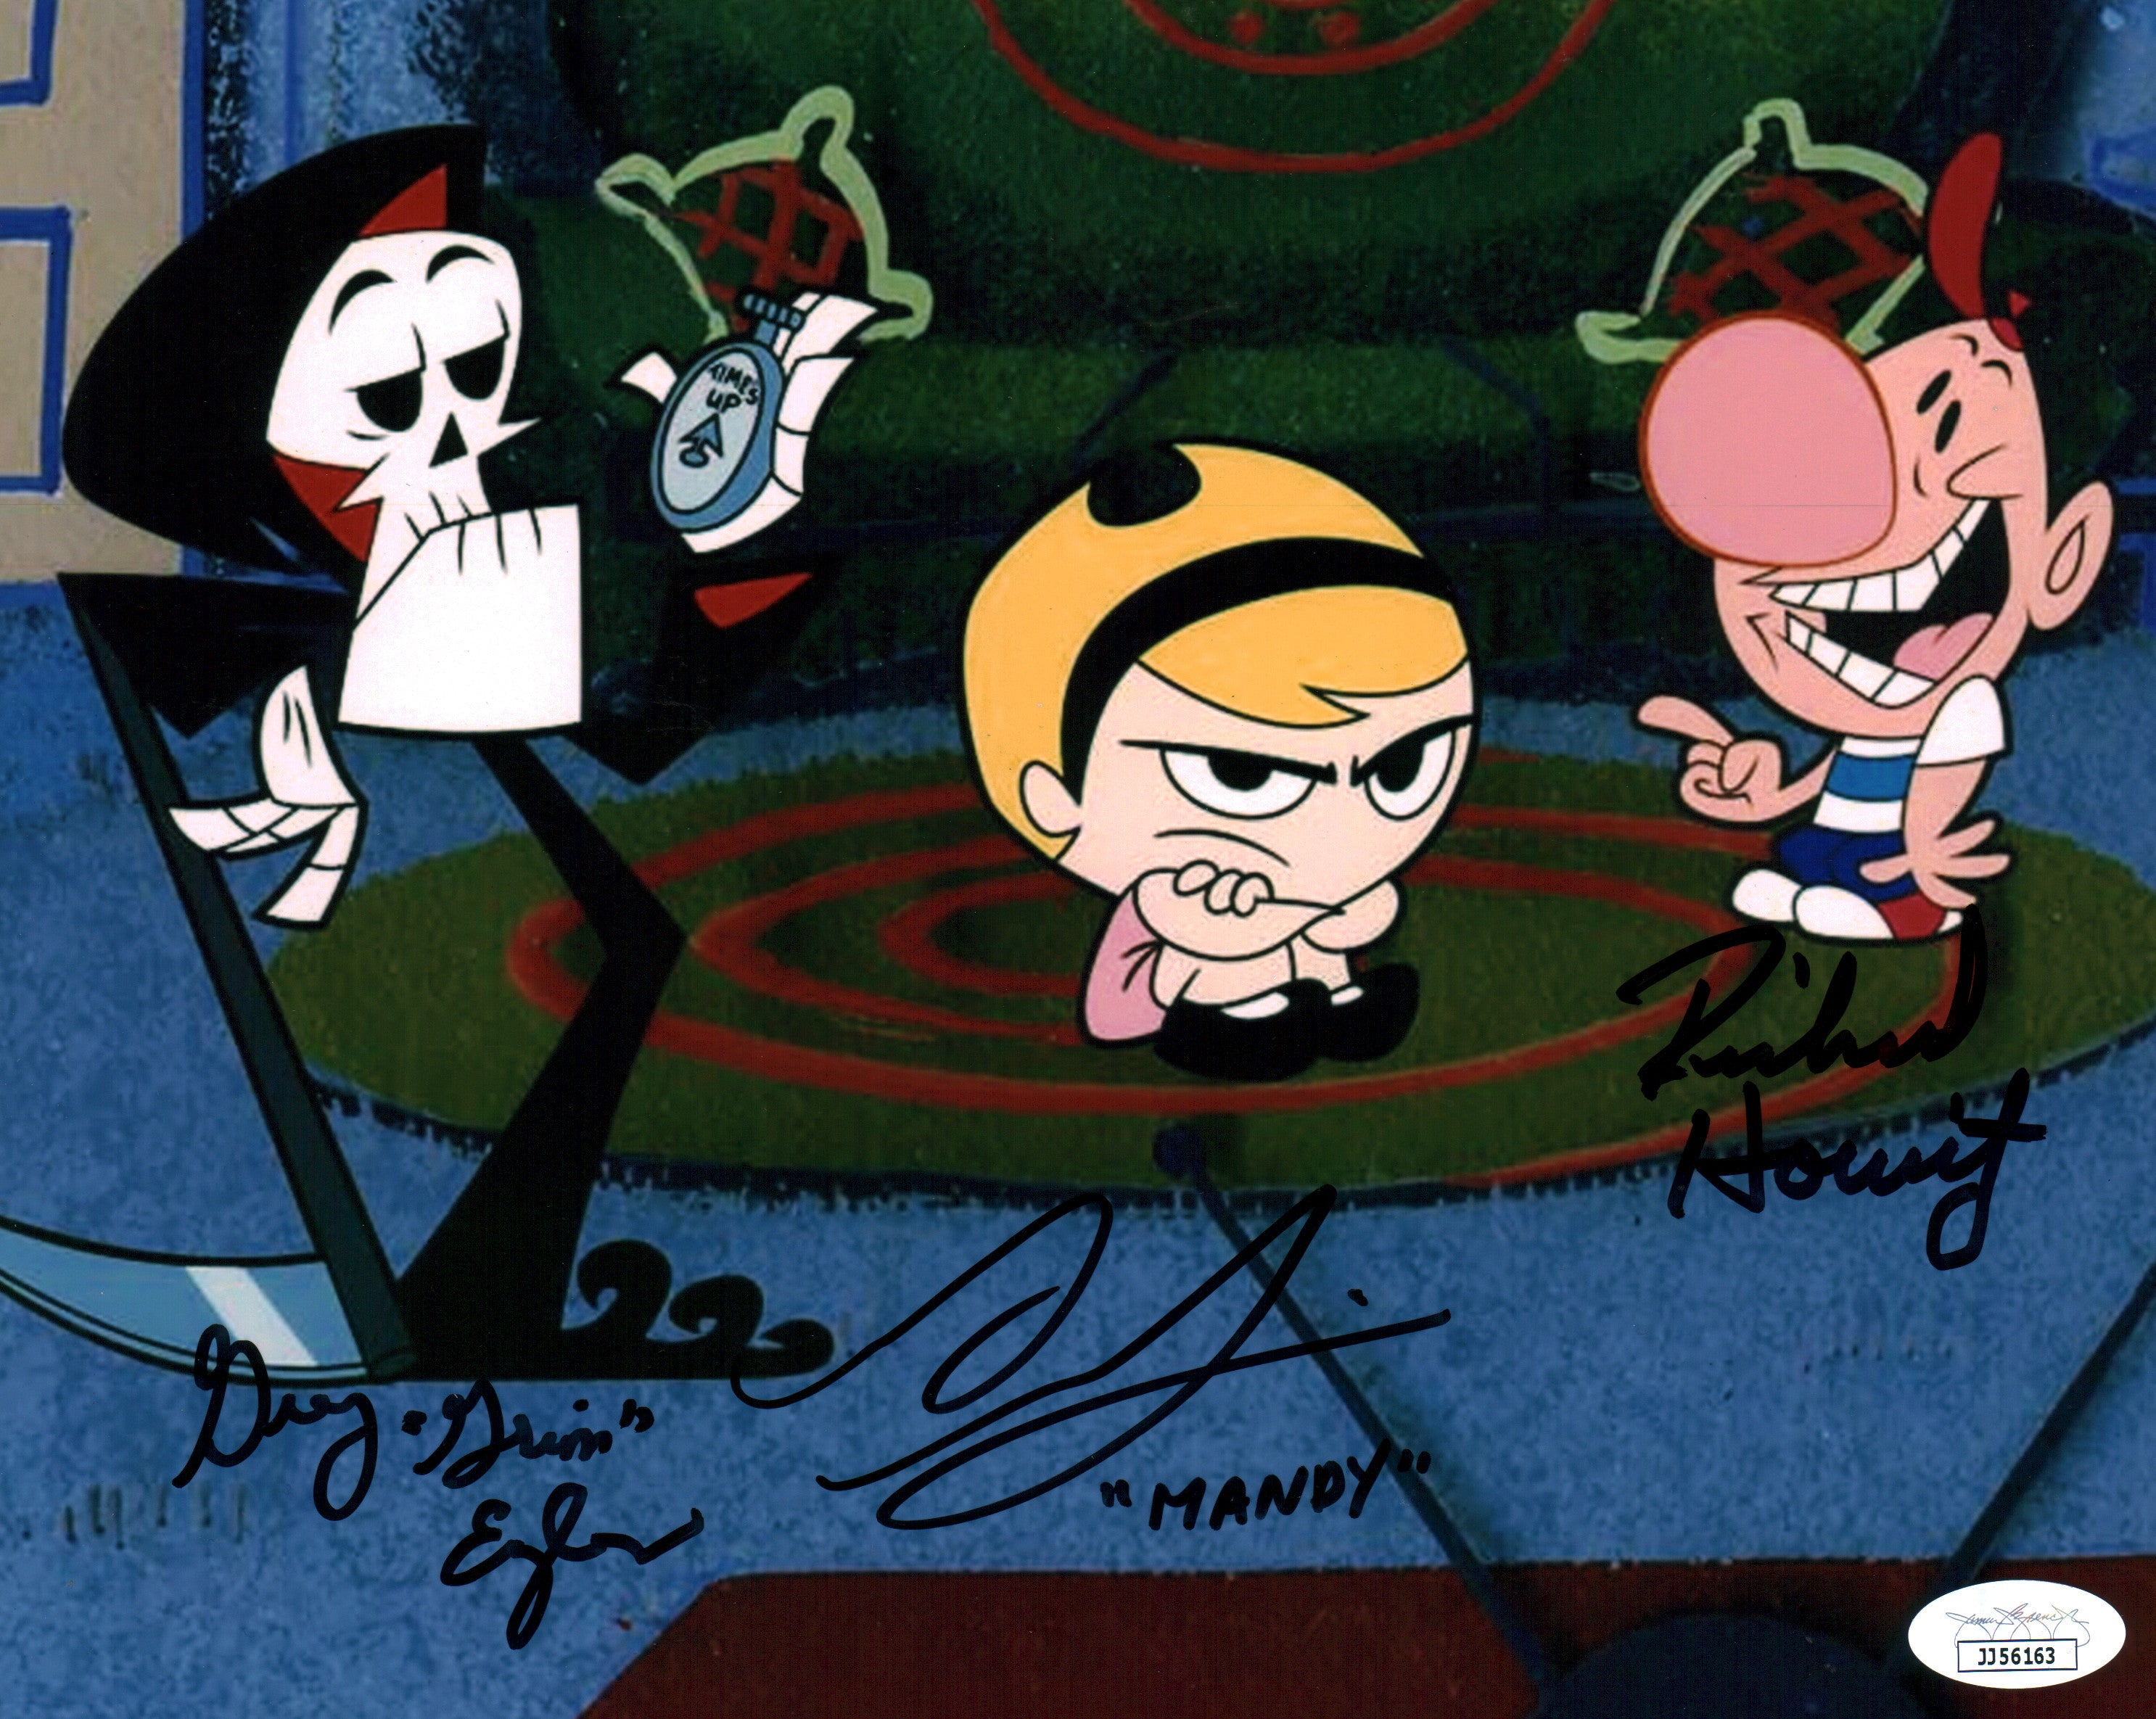 The Grim Adventures of Billy & Mandy 8x10 Signed Photo DeLisle Eagles Horvitz JSA Certified Autograph